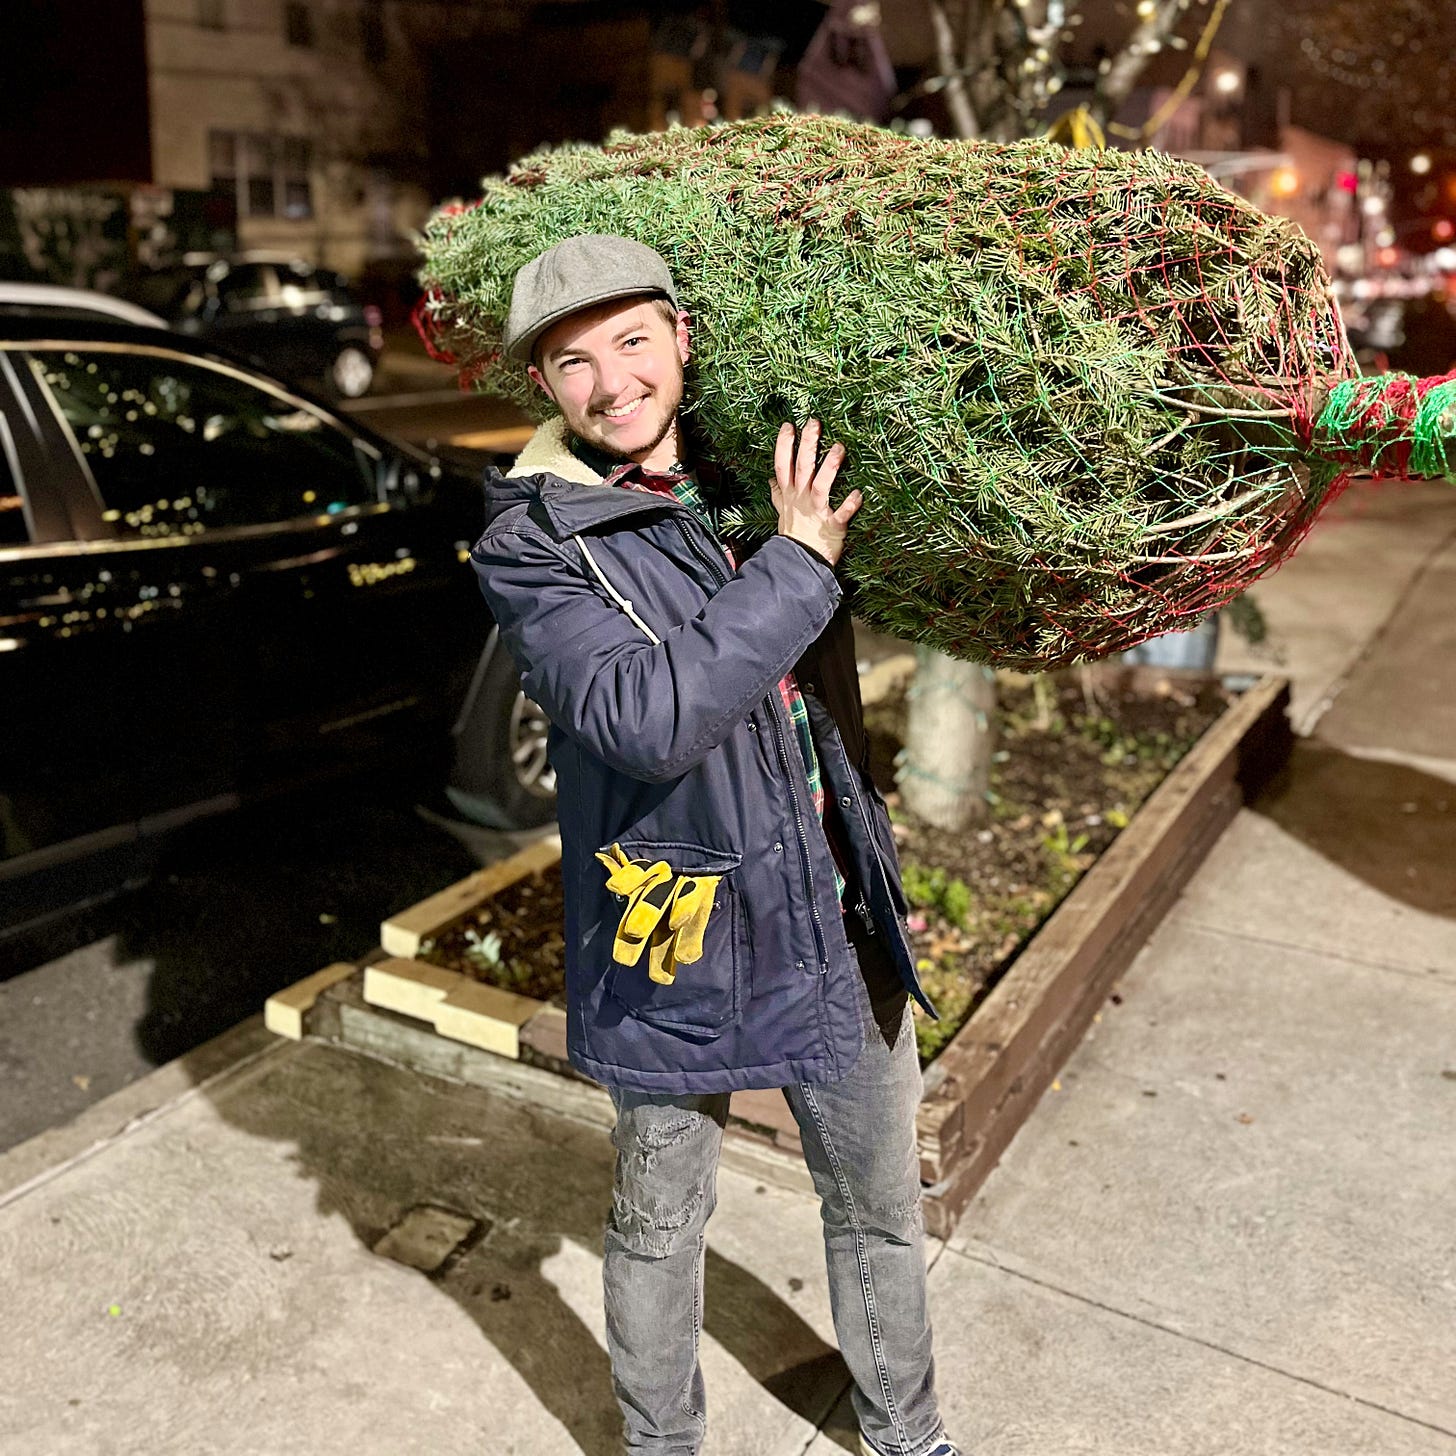 Jackson Bird holding a netted Christmas tree over his shoulder on a New York City street in the evening. He's smiling broadly at the camera and dressed in a winter coat and flat cap with work gloves sticking out of his pocket.